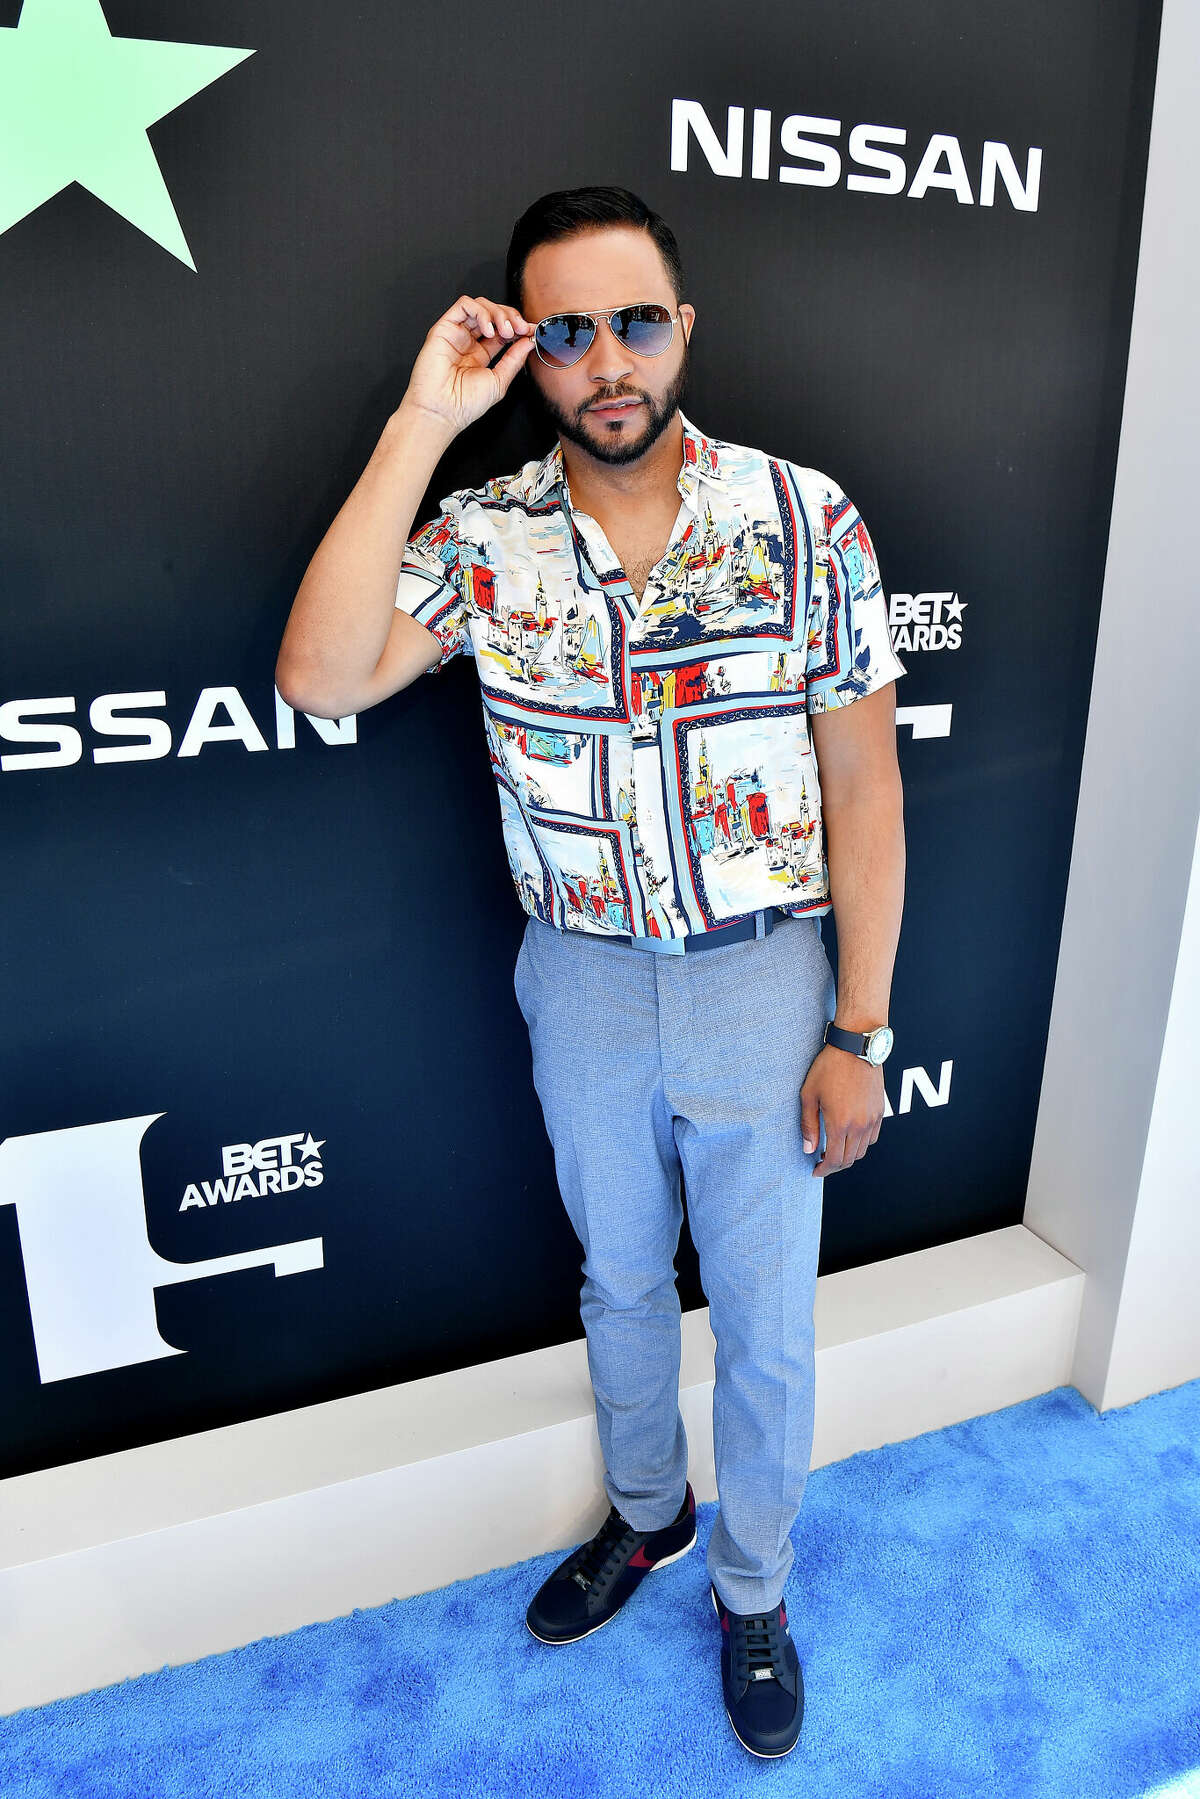 LOS ANGELES, CALIFORNIA - JUNE 23: Jason Dirden attends the 2019 BET Awards at Microsoft Theater on June 23, 2019 in Los Angeles, California. (Photo by Paras Griffin/Getty Images)